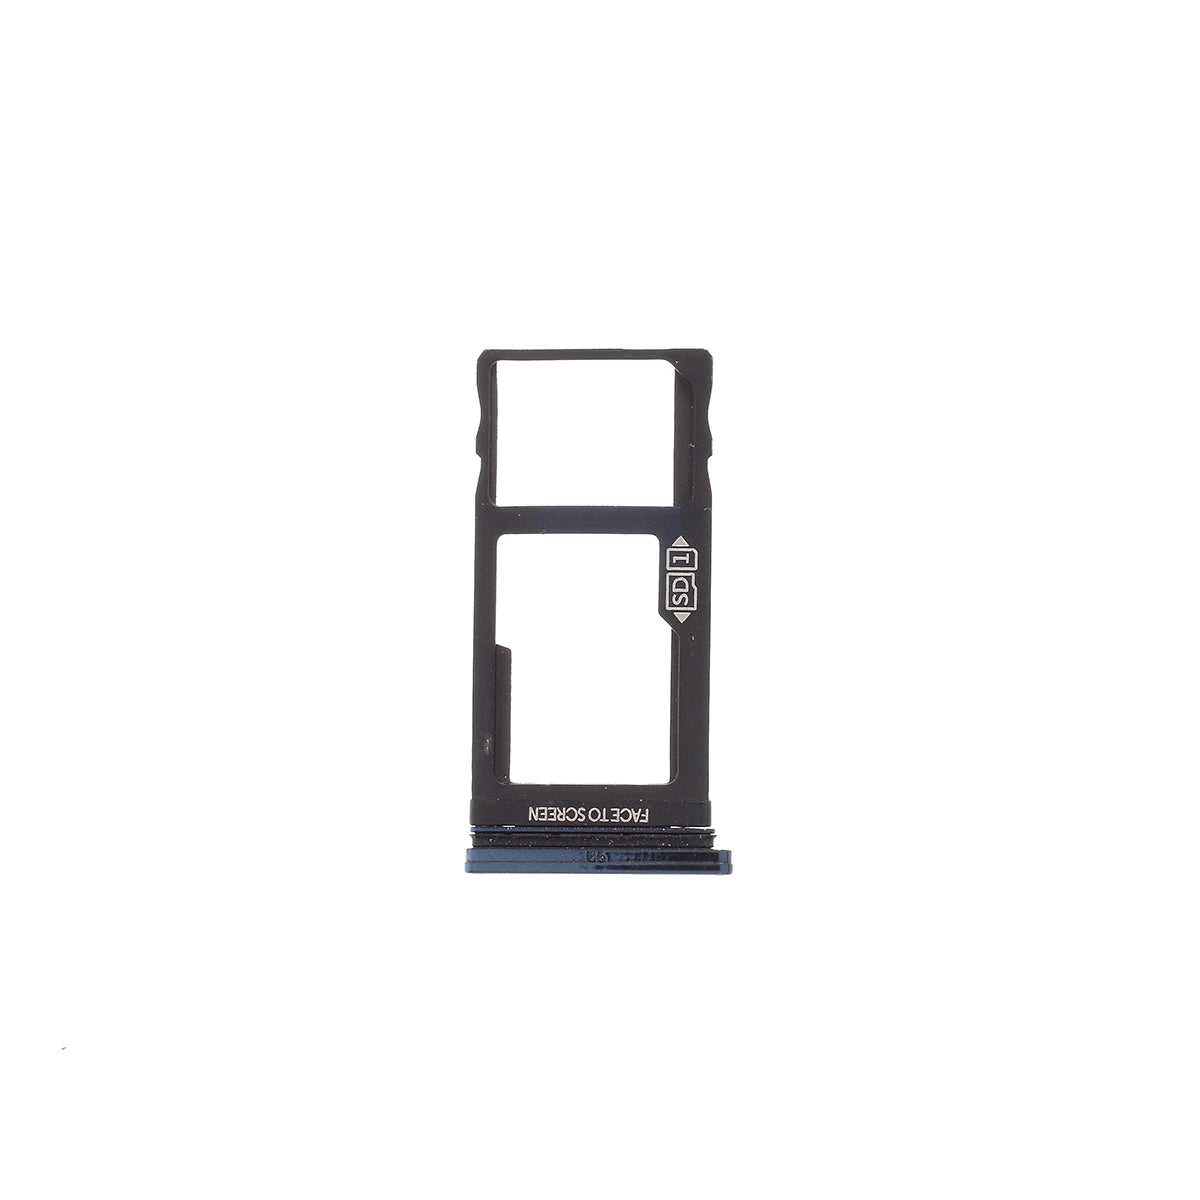 OEM Micro SD Card Tray Holder Replacement for Motorola One Vision P50 - Dark Blue